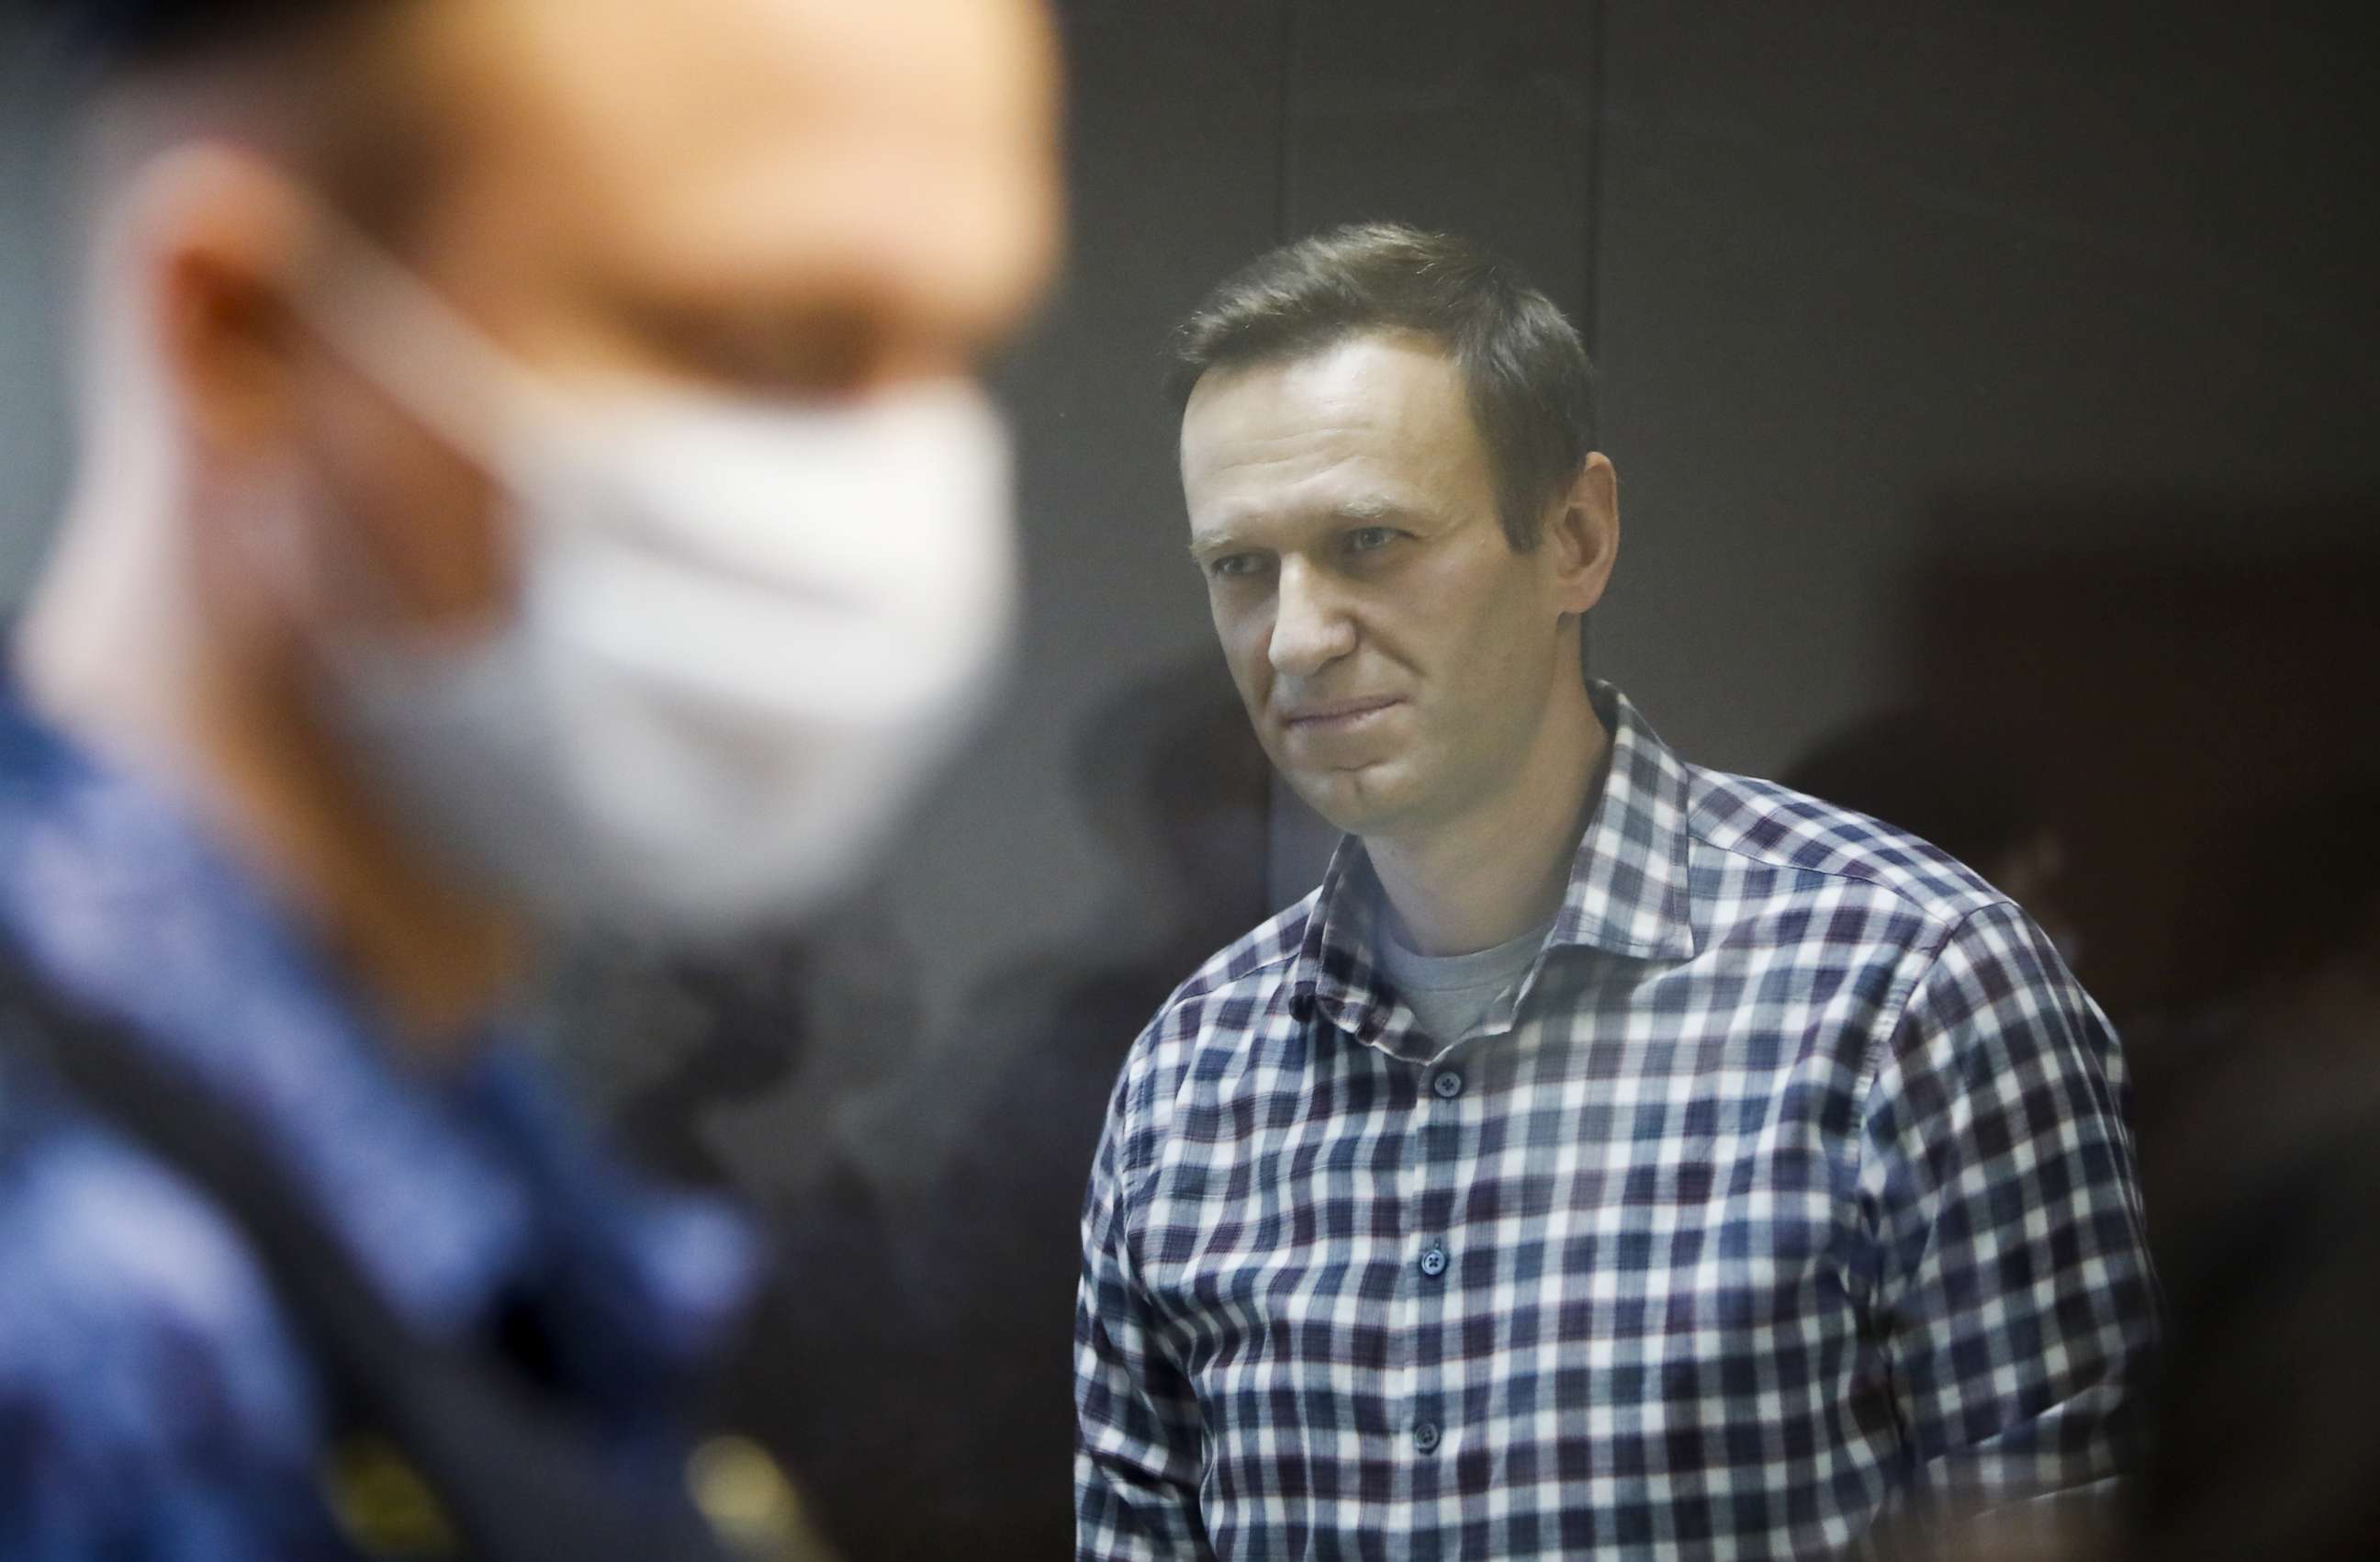 FILE PHOTO: Russian opposition politician Alexei Navalny attends a hearing to consider an appeal against an earlier court decision to change his suspended sentence to a real prison term, in Moscow, Russia February 20, 2021. 